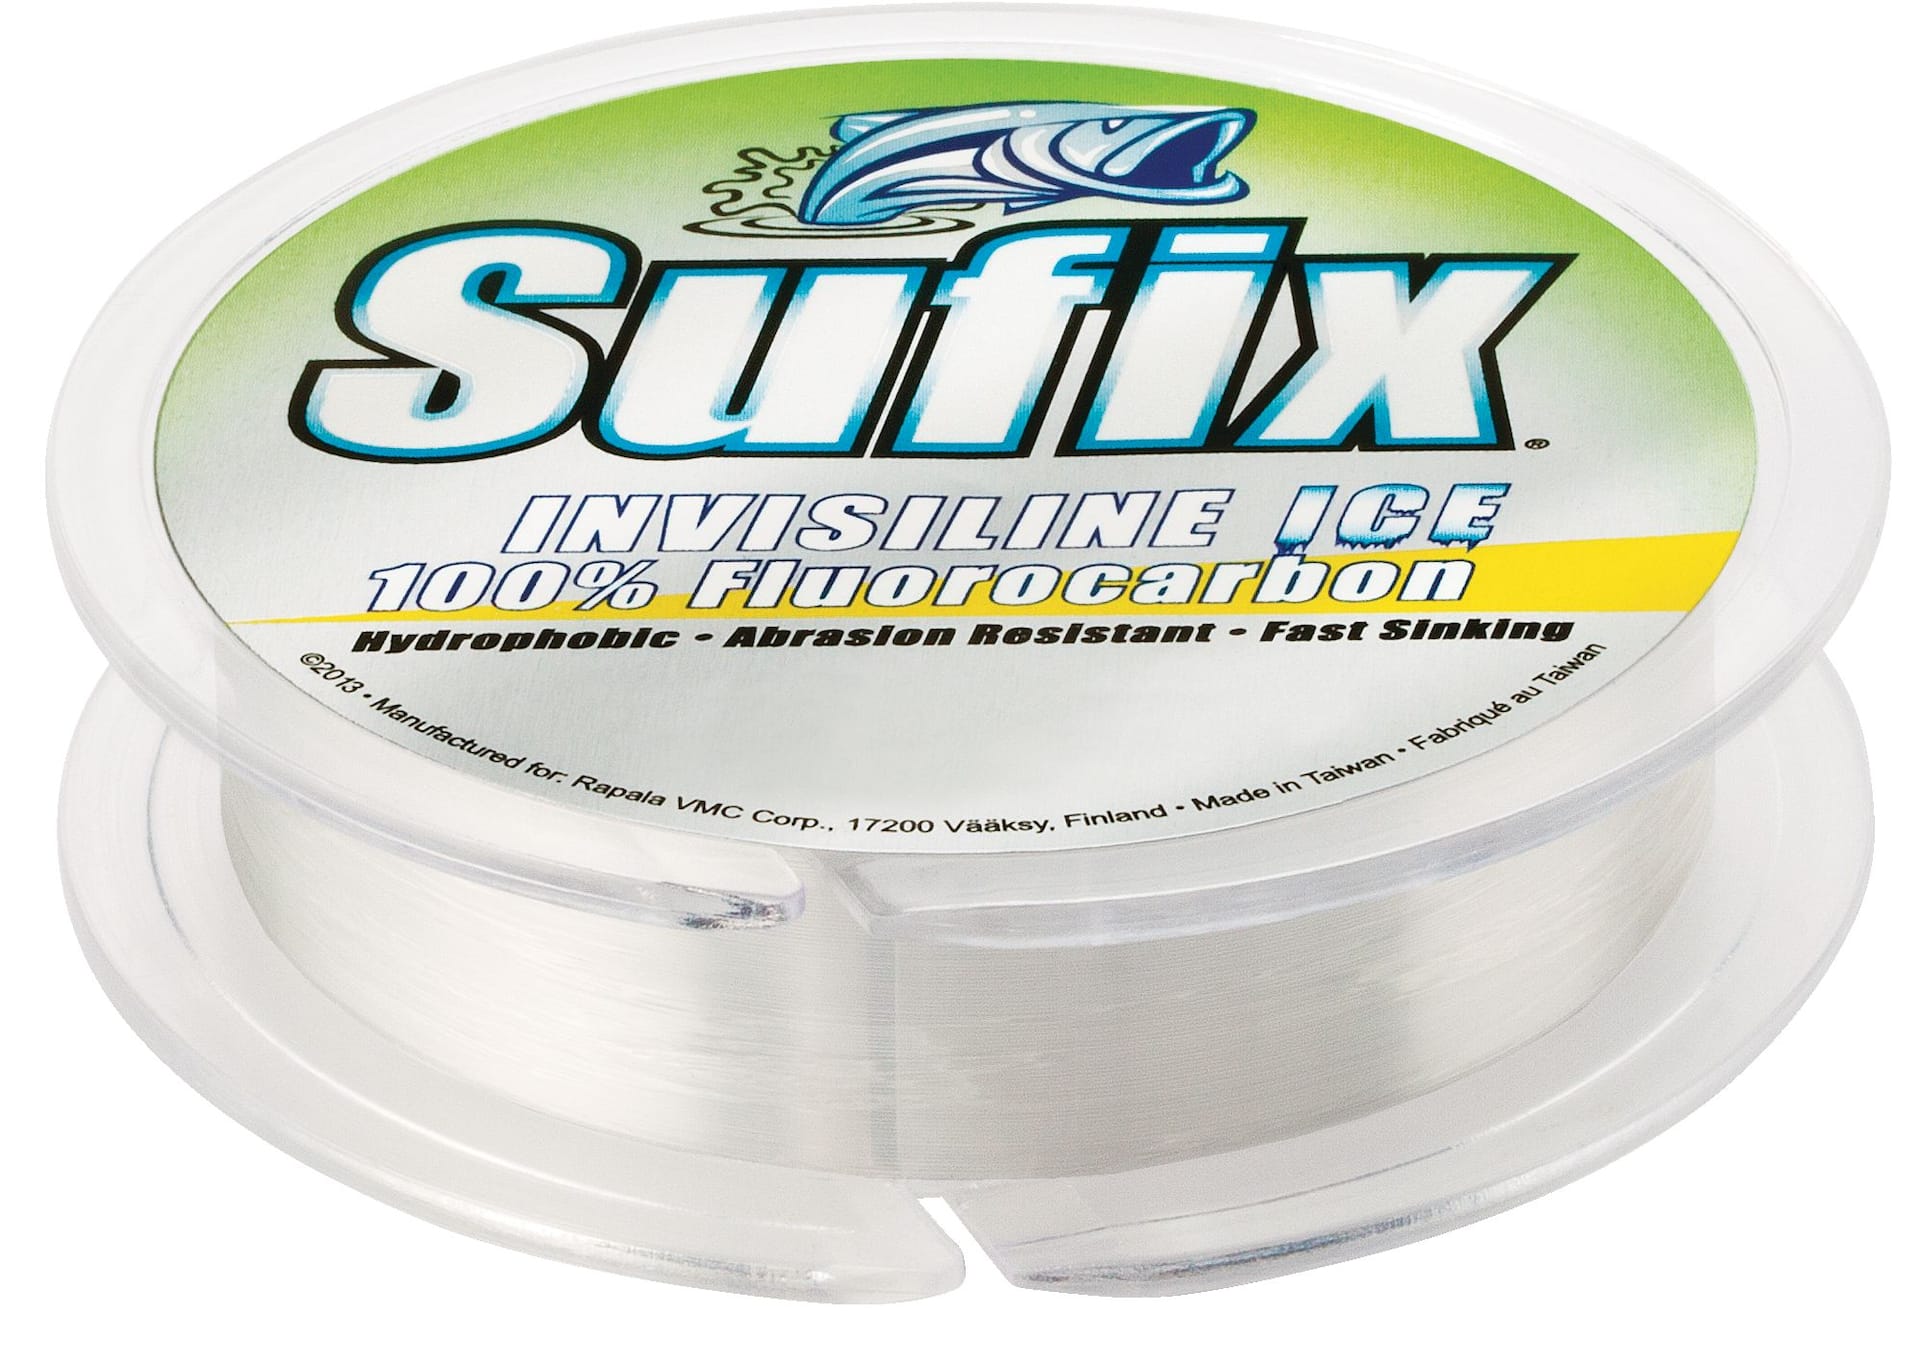 advance fluorocarbon 8lb clear - OutfitterSSM